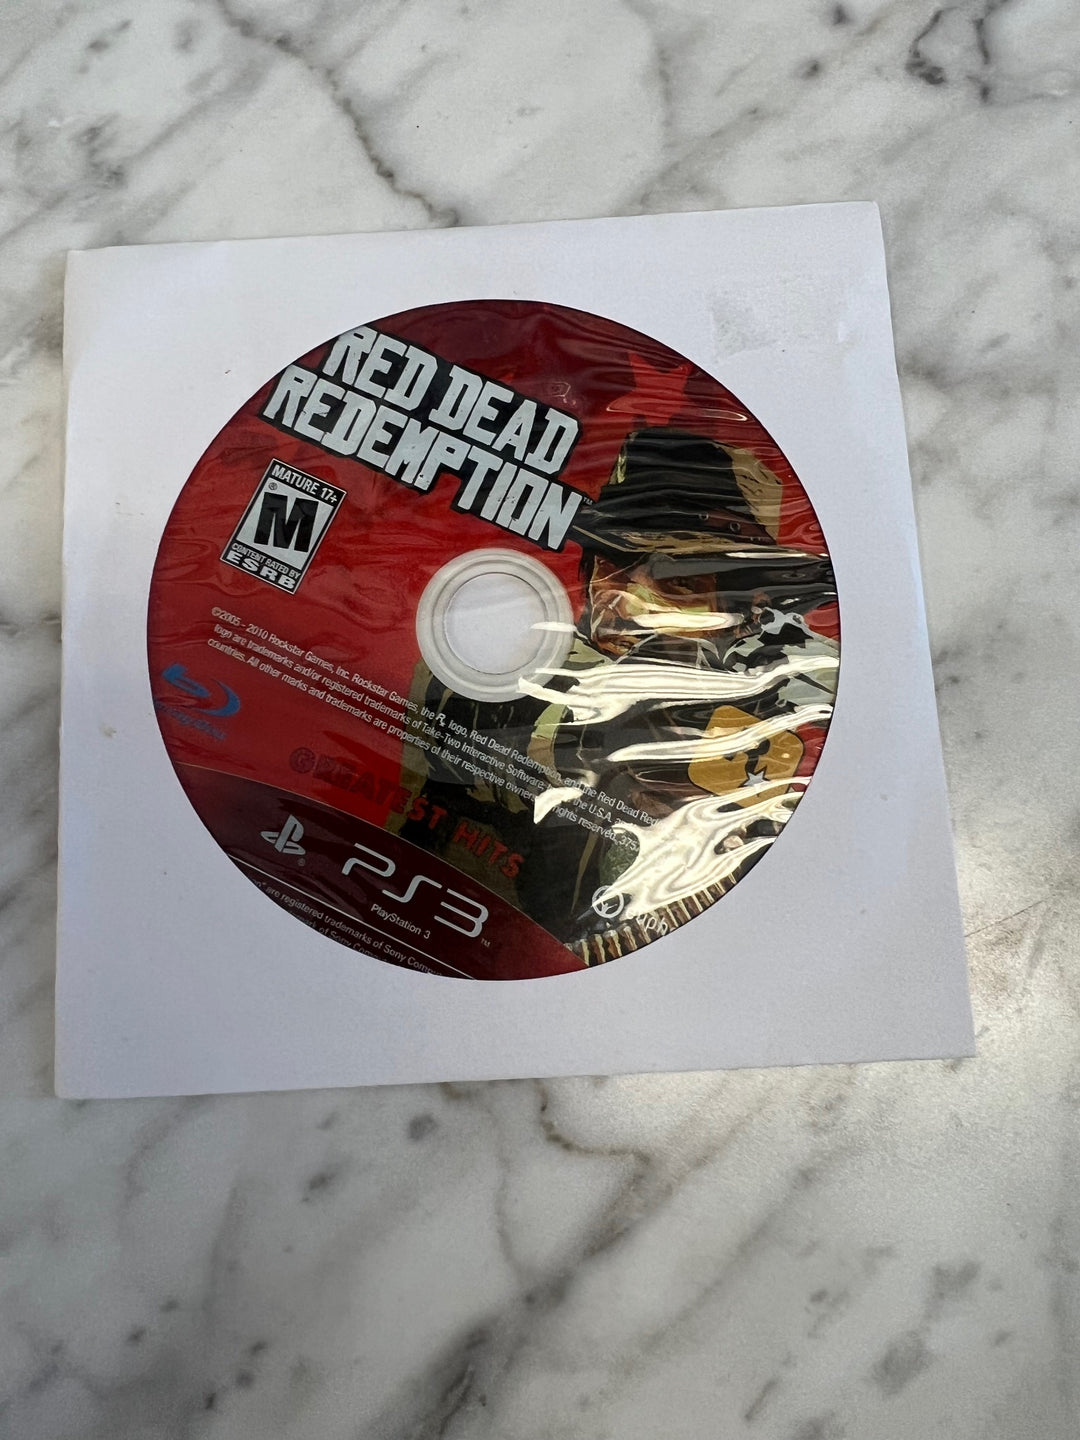 Red Dead Redemption for PS3 Playstation 3 Disc Only No Case/Manual DU62724